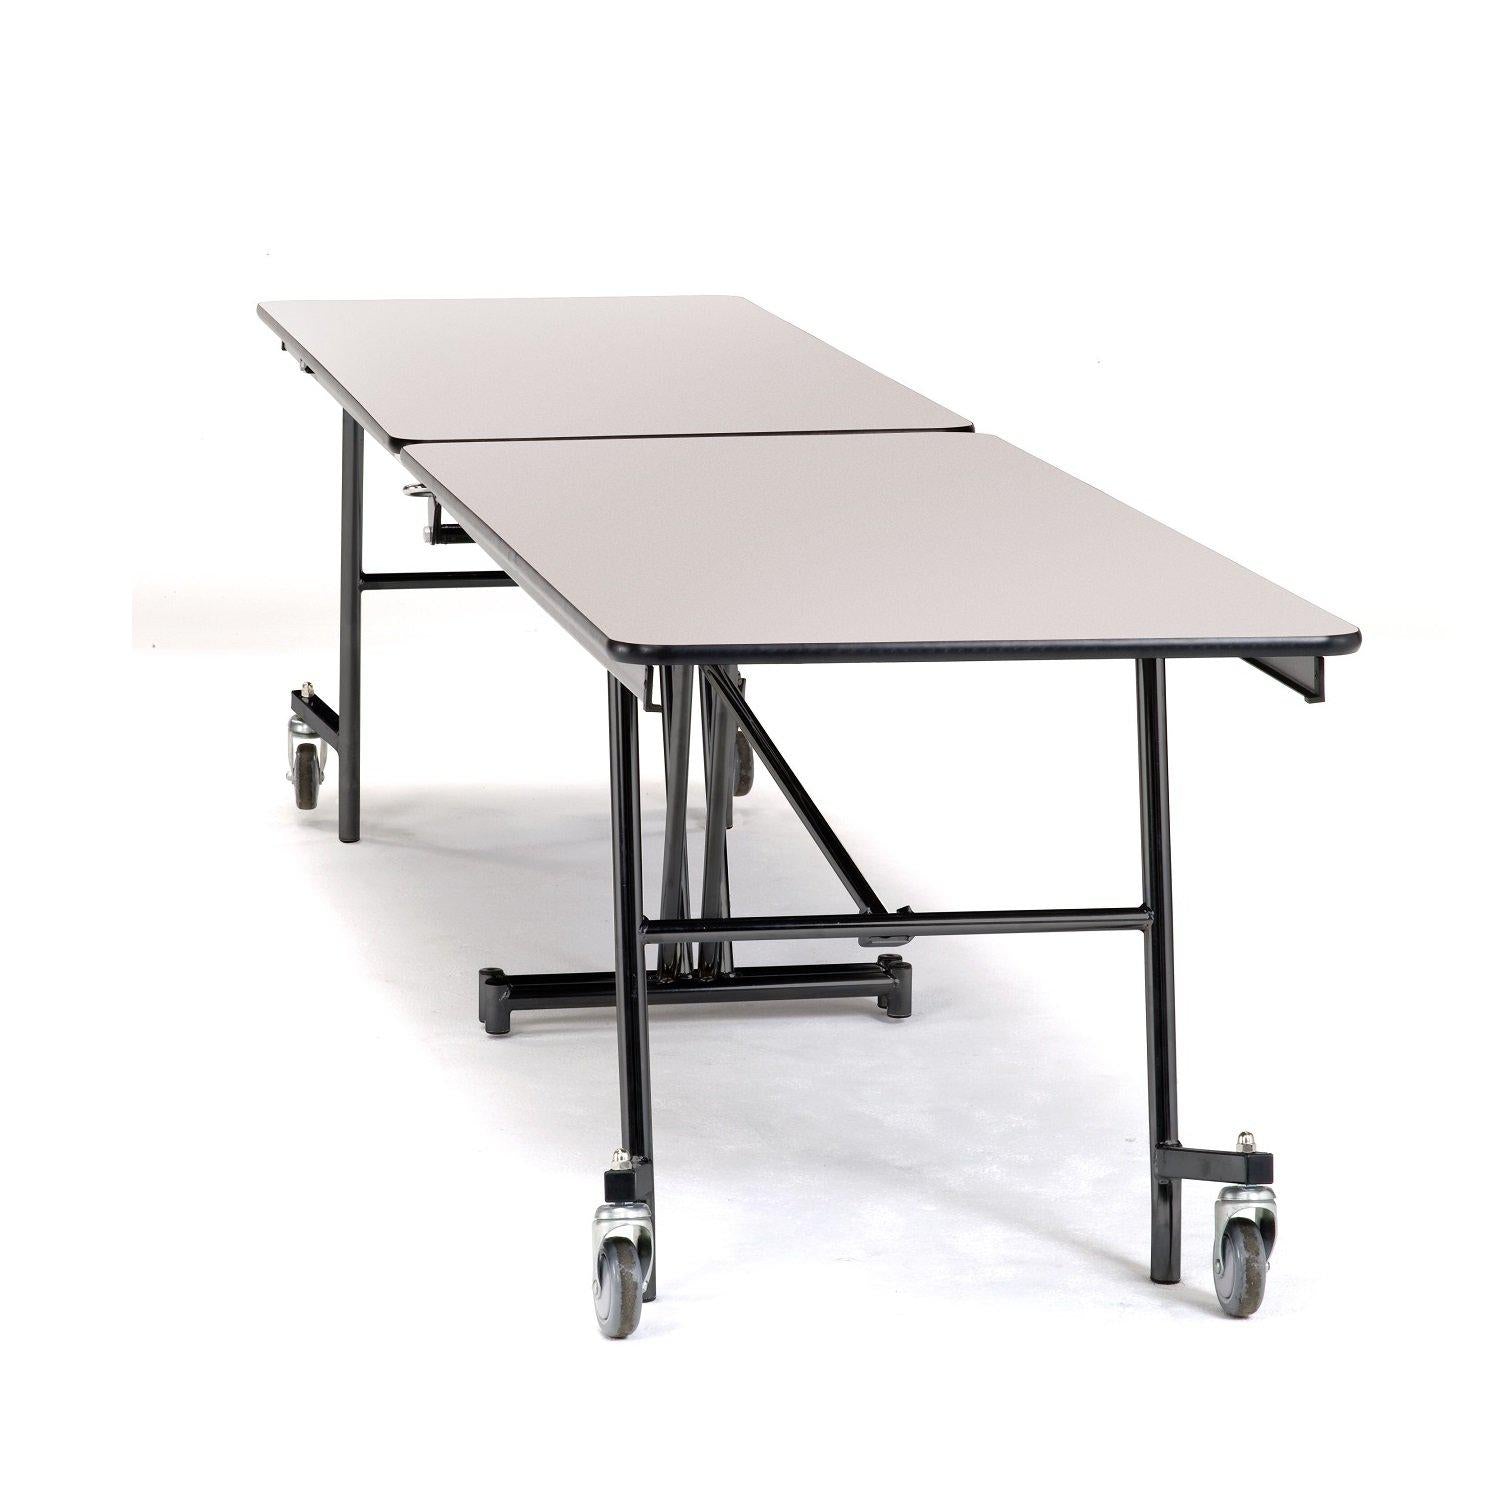 Mobile Shape Cafeteria Table, 10' Rectangle, Plywood Core, Vinyl T-Mold Edge, Textured Black Frame